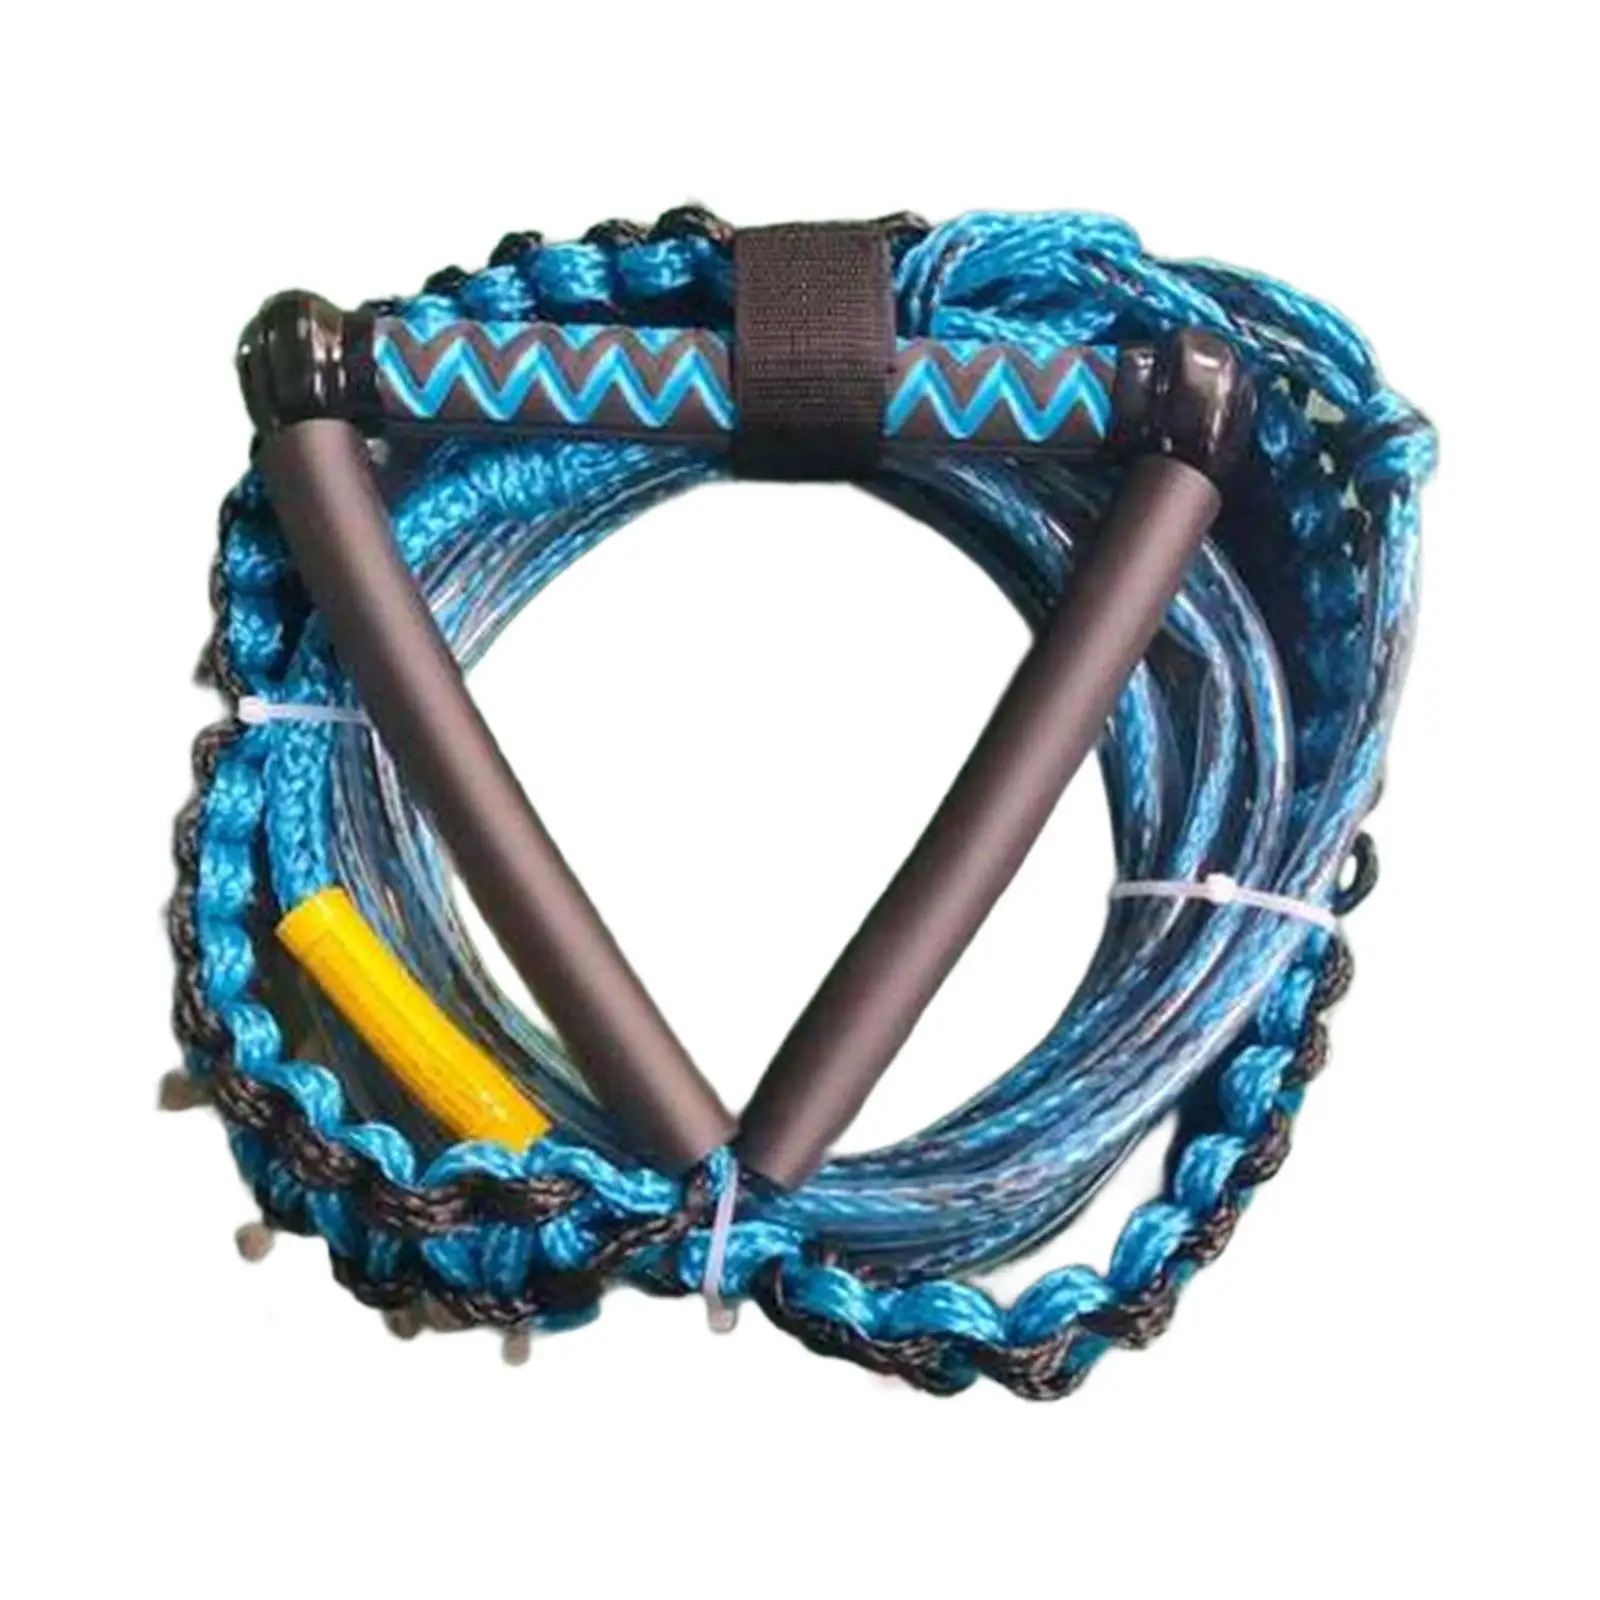 

Water Ski Rope Heavy Duty Multipurpose Water Sports Rope with Handle Boat Surfing Rope Wakeboard Tow Rope for Kneeboard Surfing